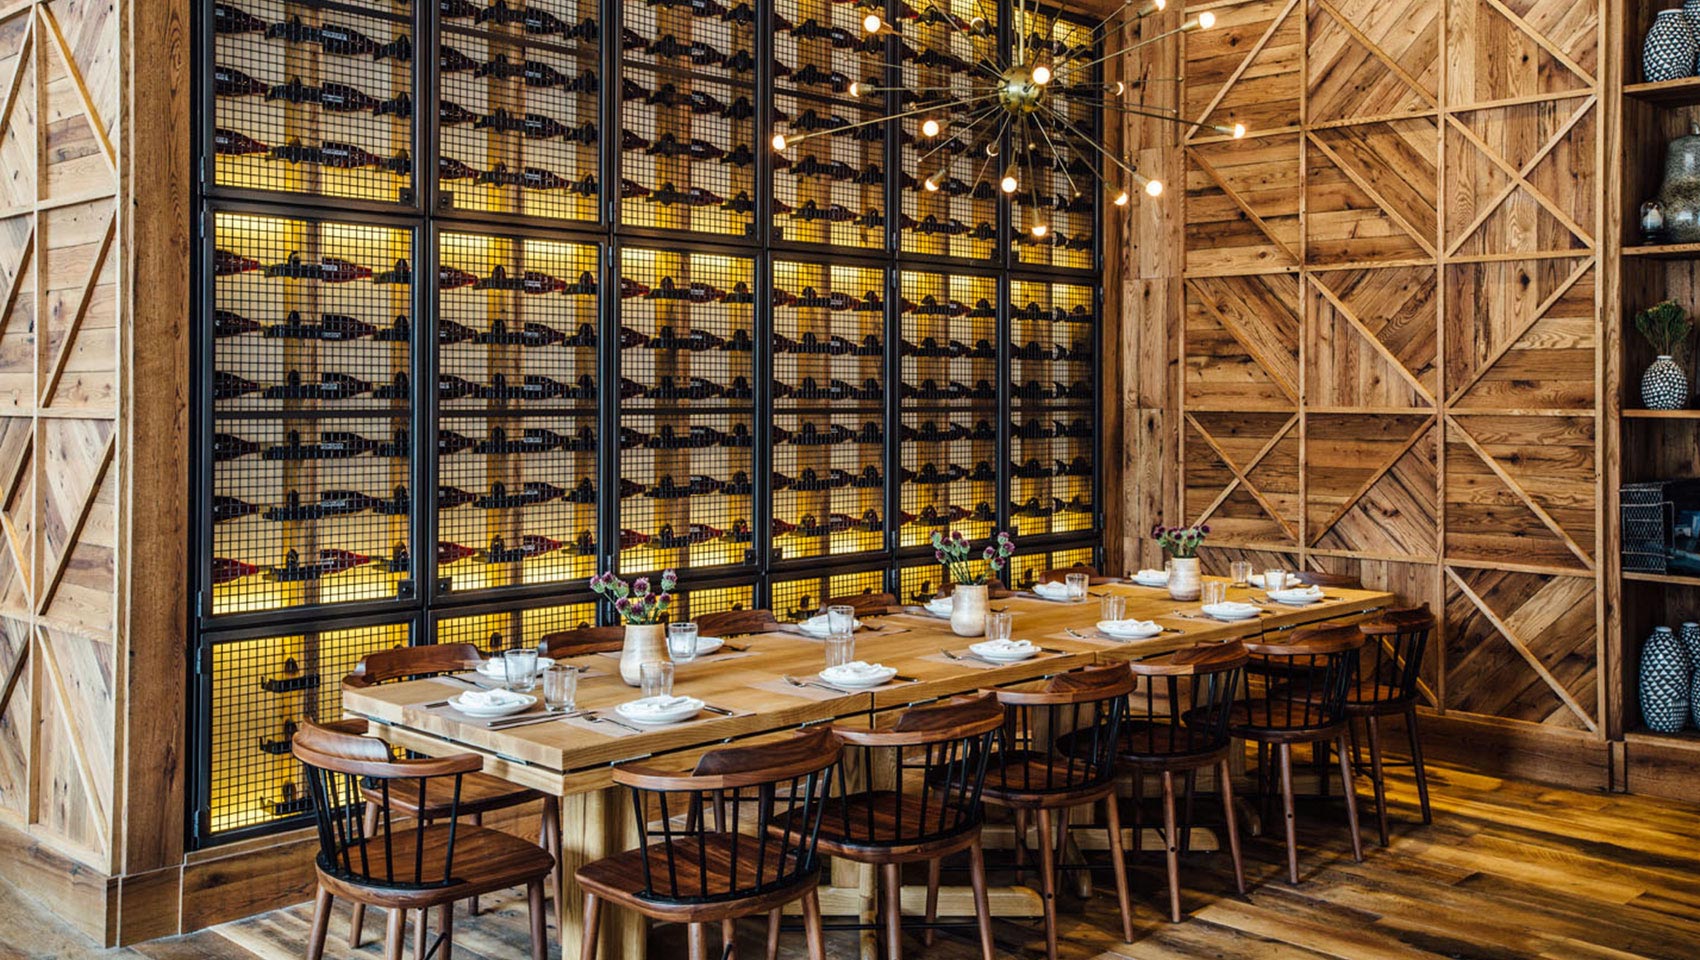 L'amico group seating with communal table, wood paneled walls, and a large wine storage area behind seating